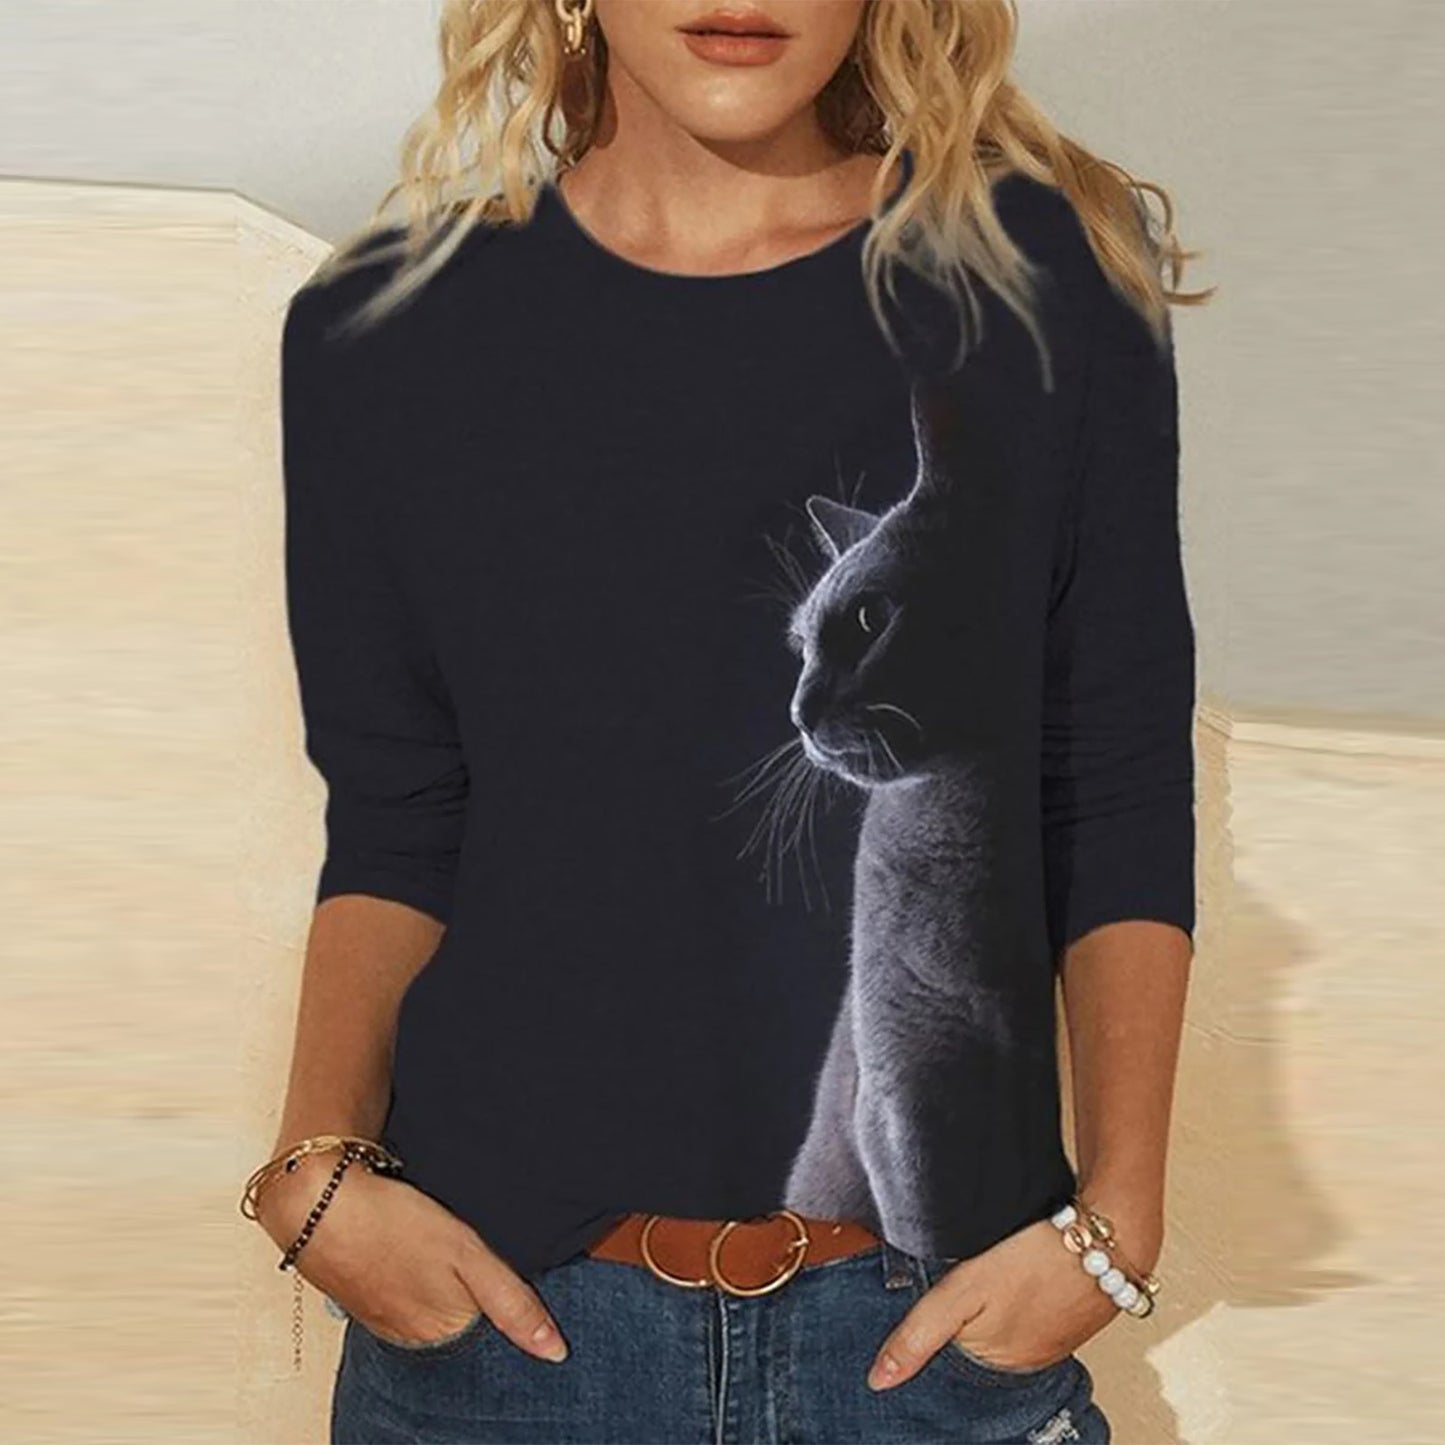 Tshirt  | Knitted Long Sleeve Printed Round Neck Women's T-Shirt | 6style |  2XL| thecurvestory.myshopify.com